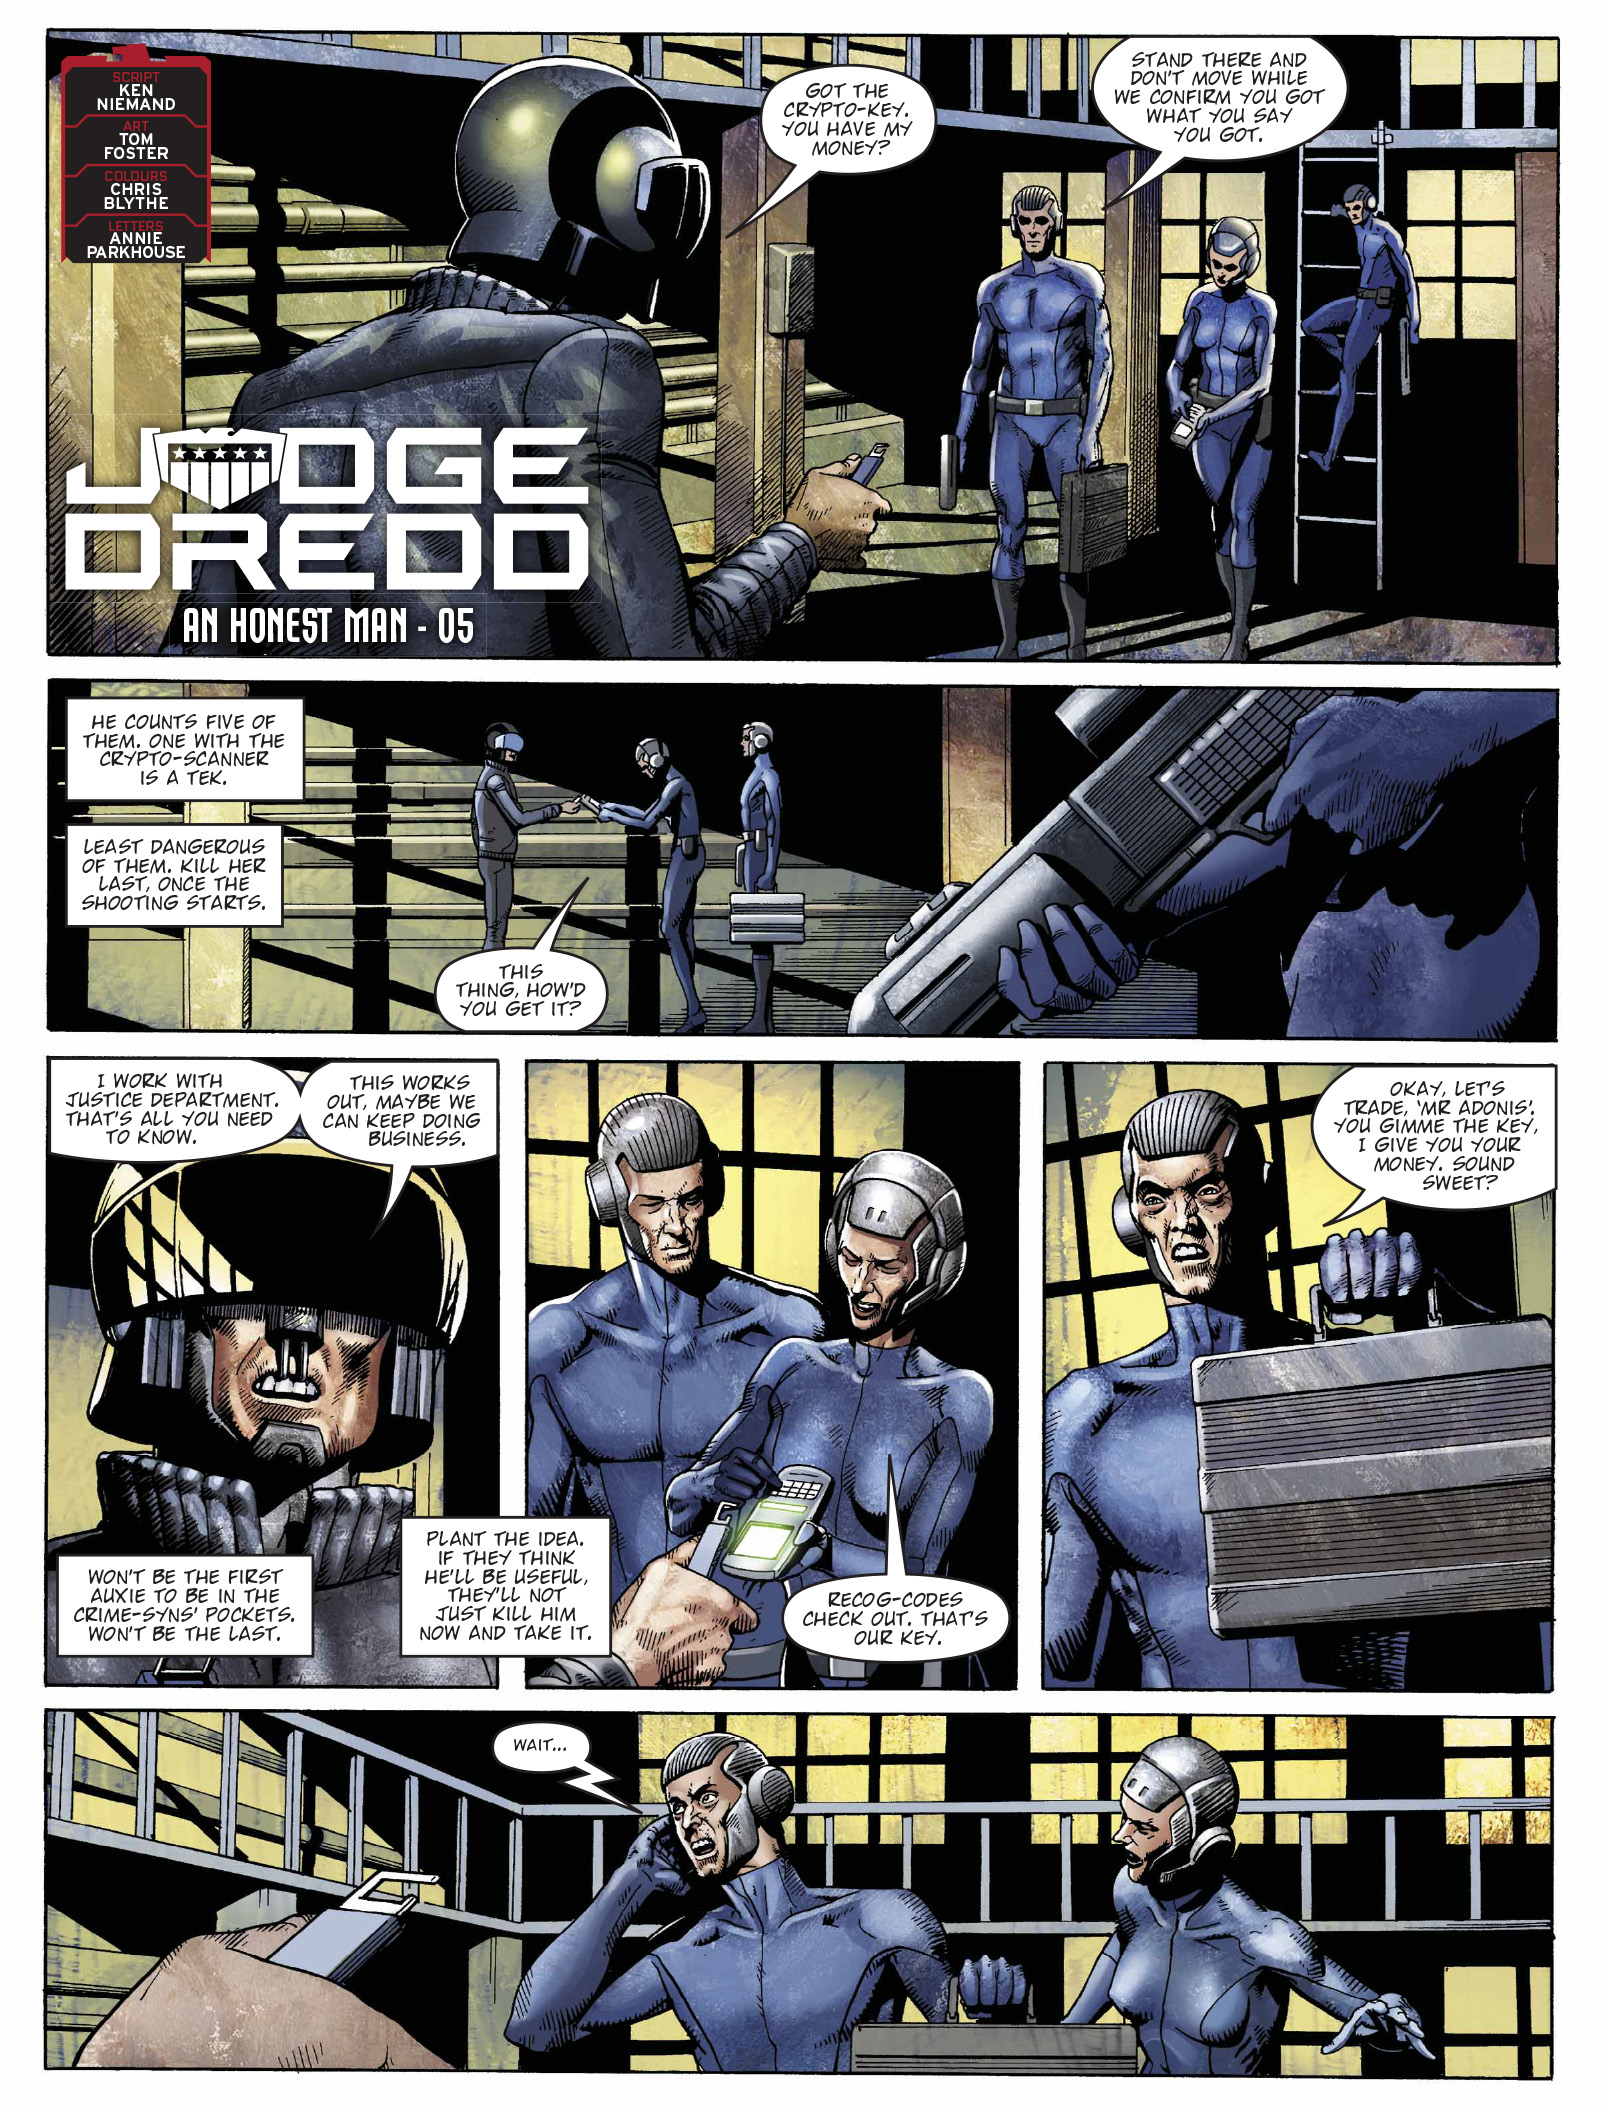 2000 AD: Chapter 2285 - Page 3